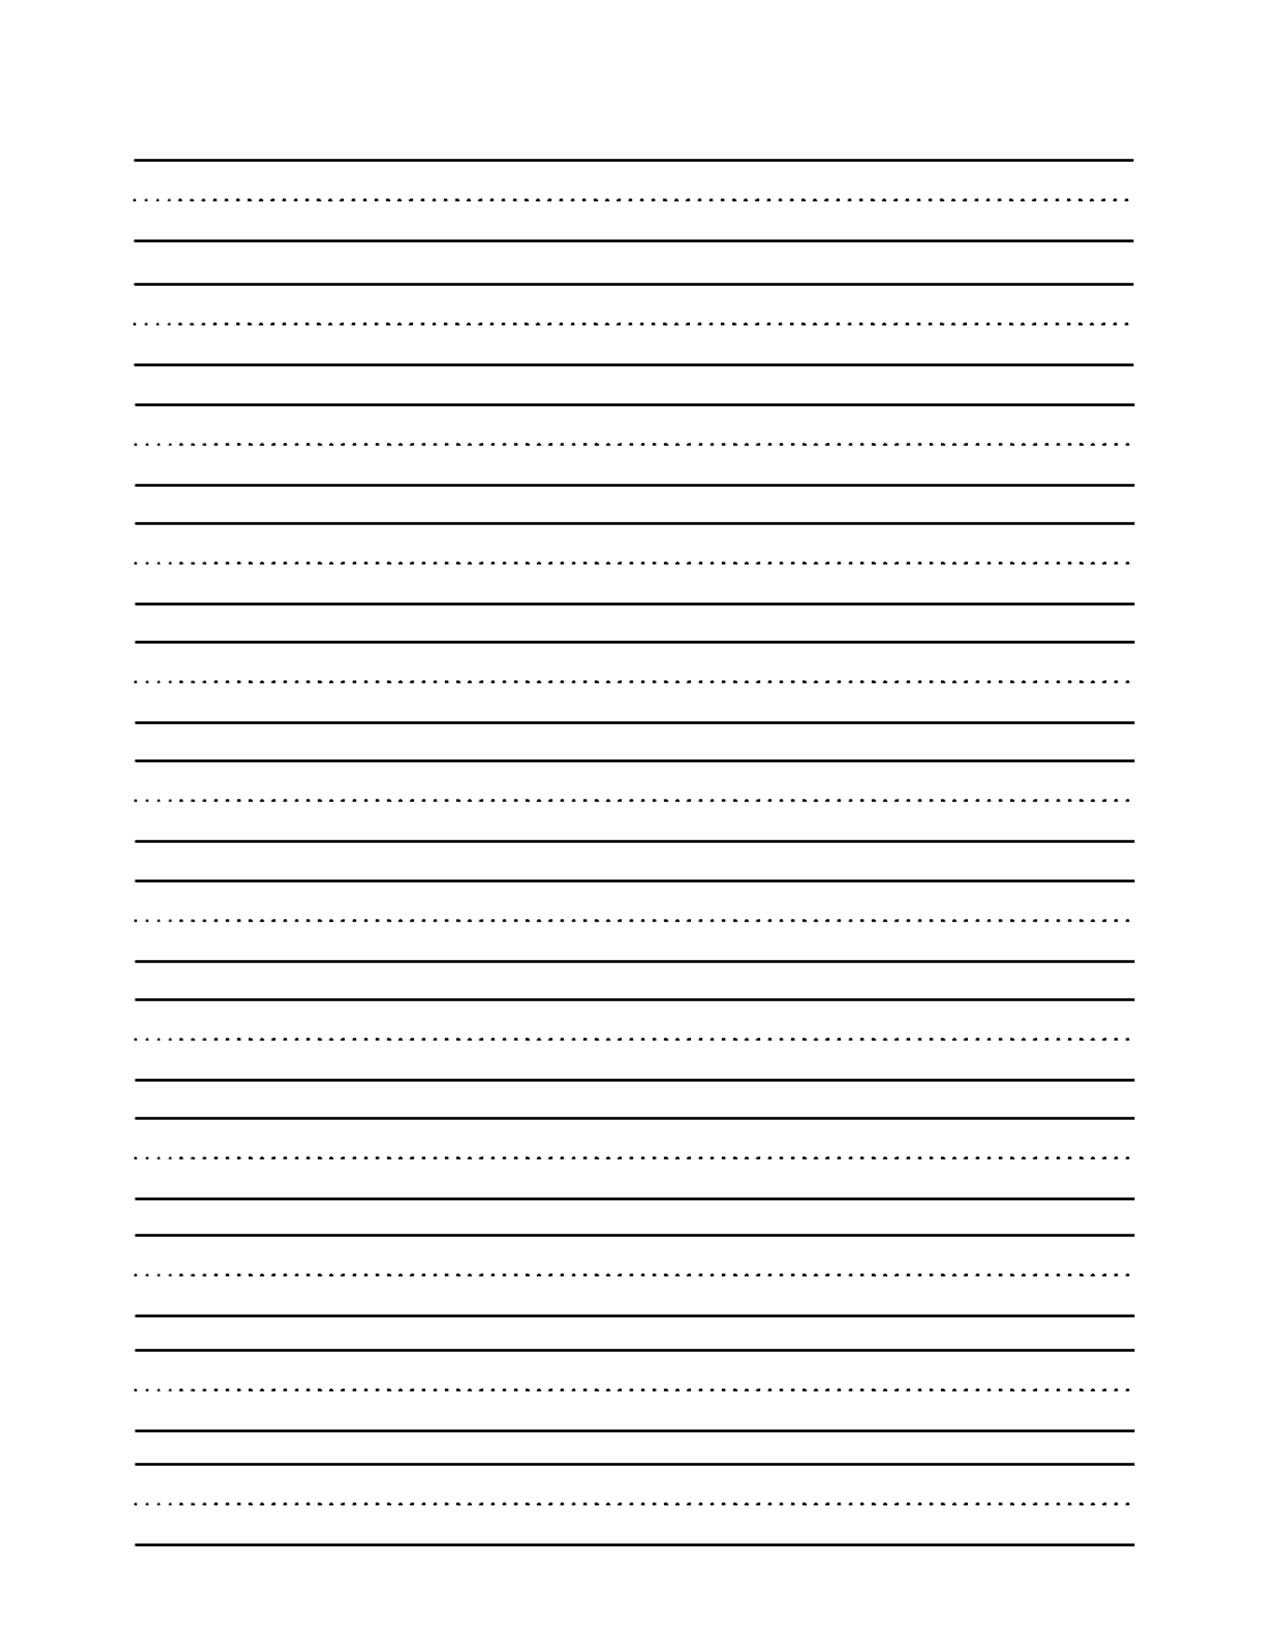 Story Writing Paper To Print For Kindergarten – Enumeration Intended For Blank Letter Writing Template For Kids